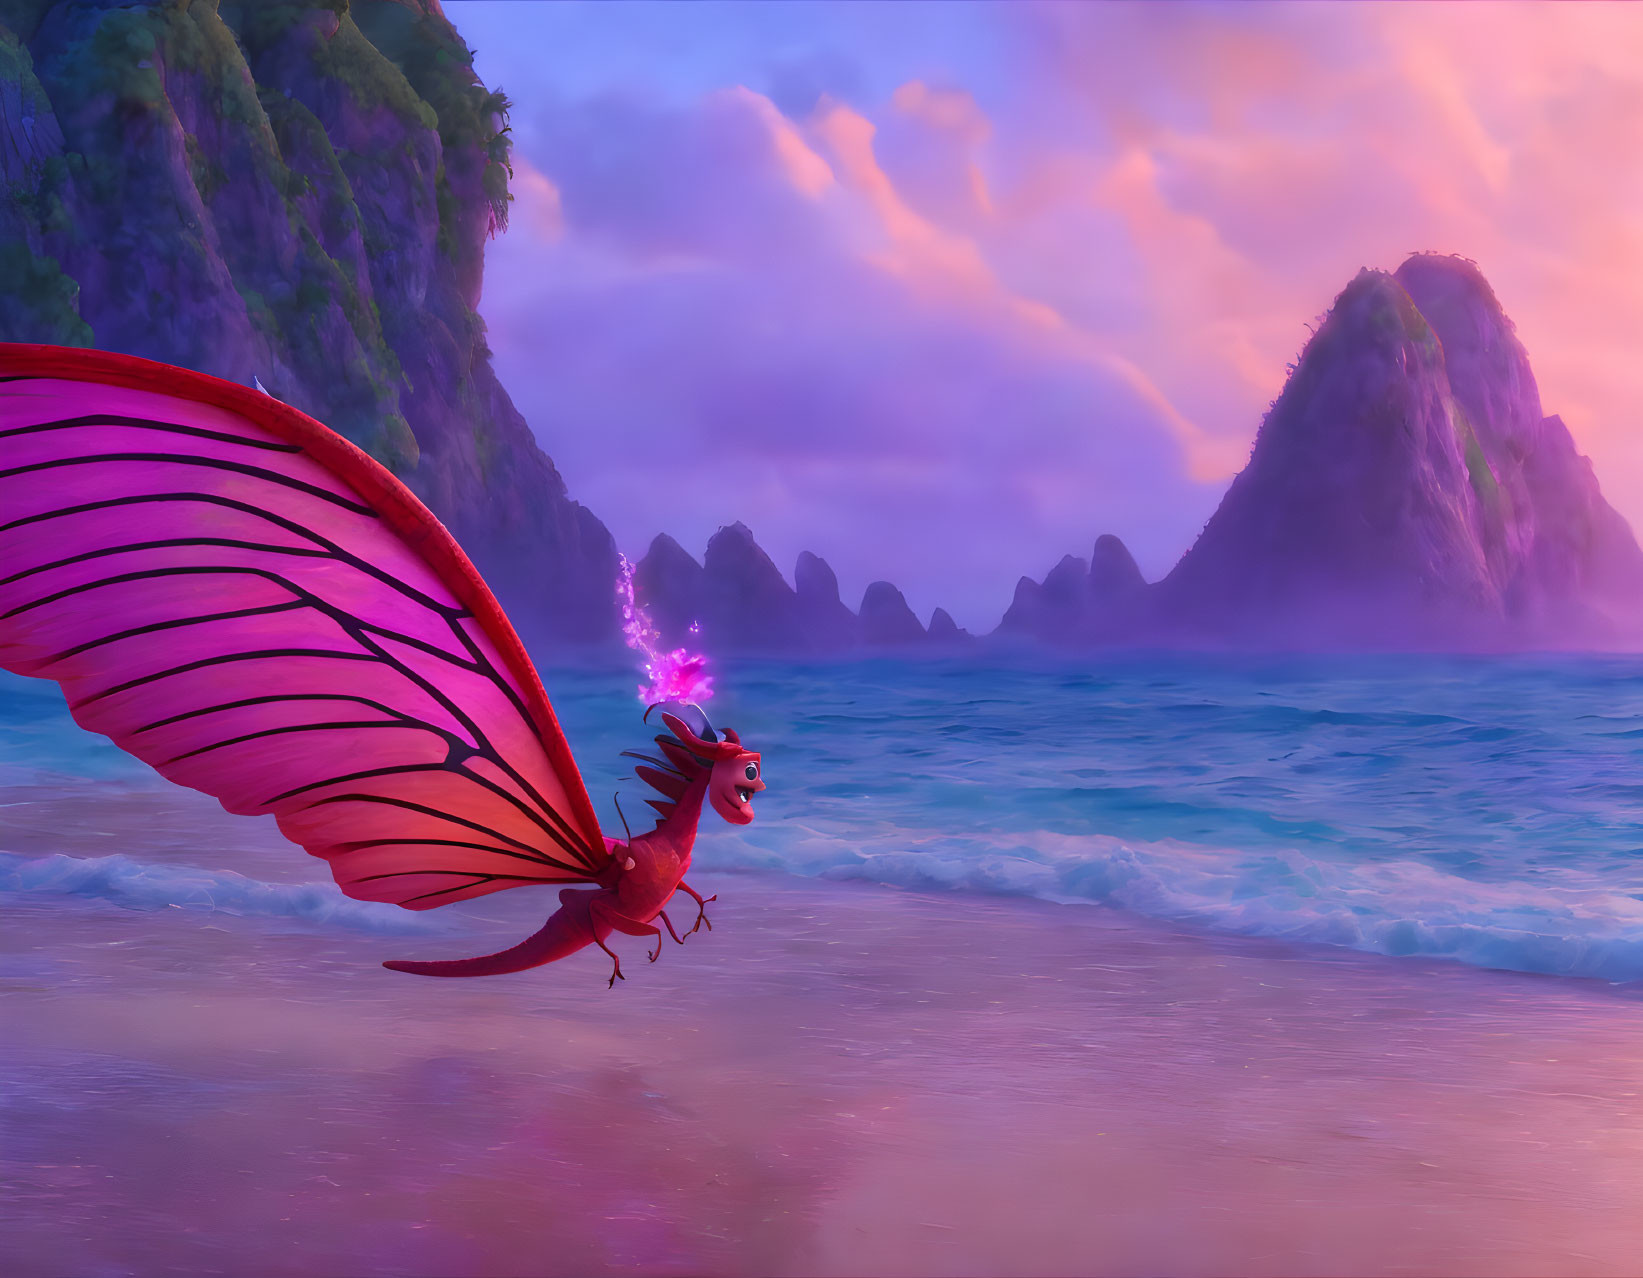 Vibrant red dragon with pink wings on beach under purple skies